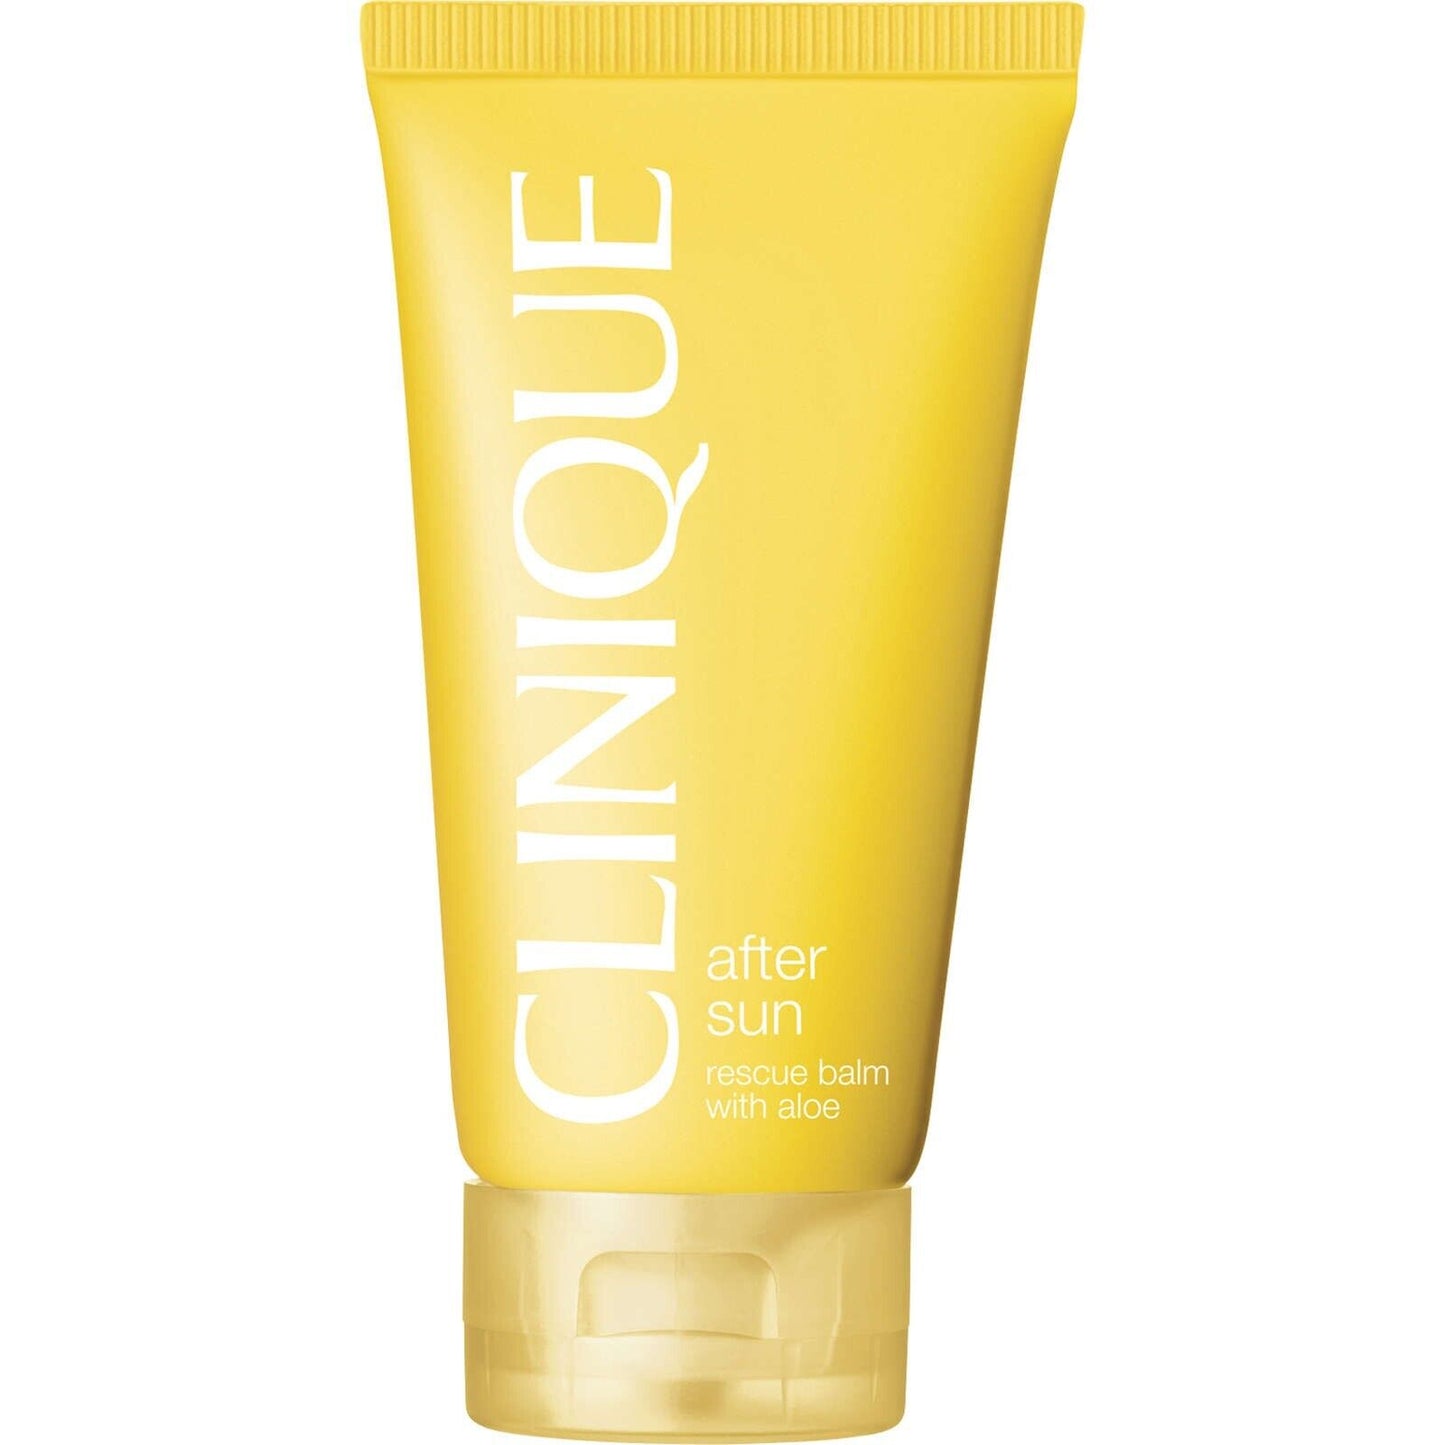 Clinique After Sun Rescue Balm with Aloe Ultra-Moisturizing Repairs 150ml NEW